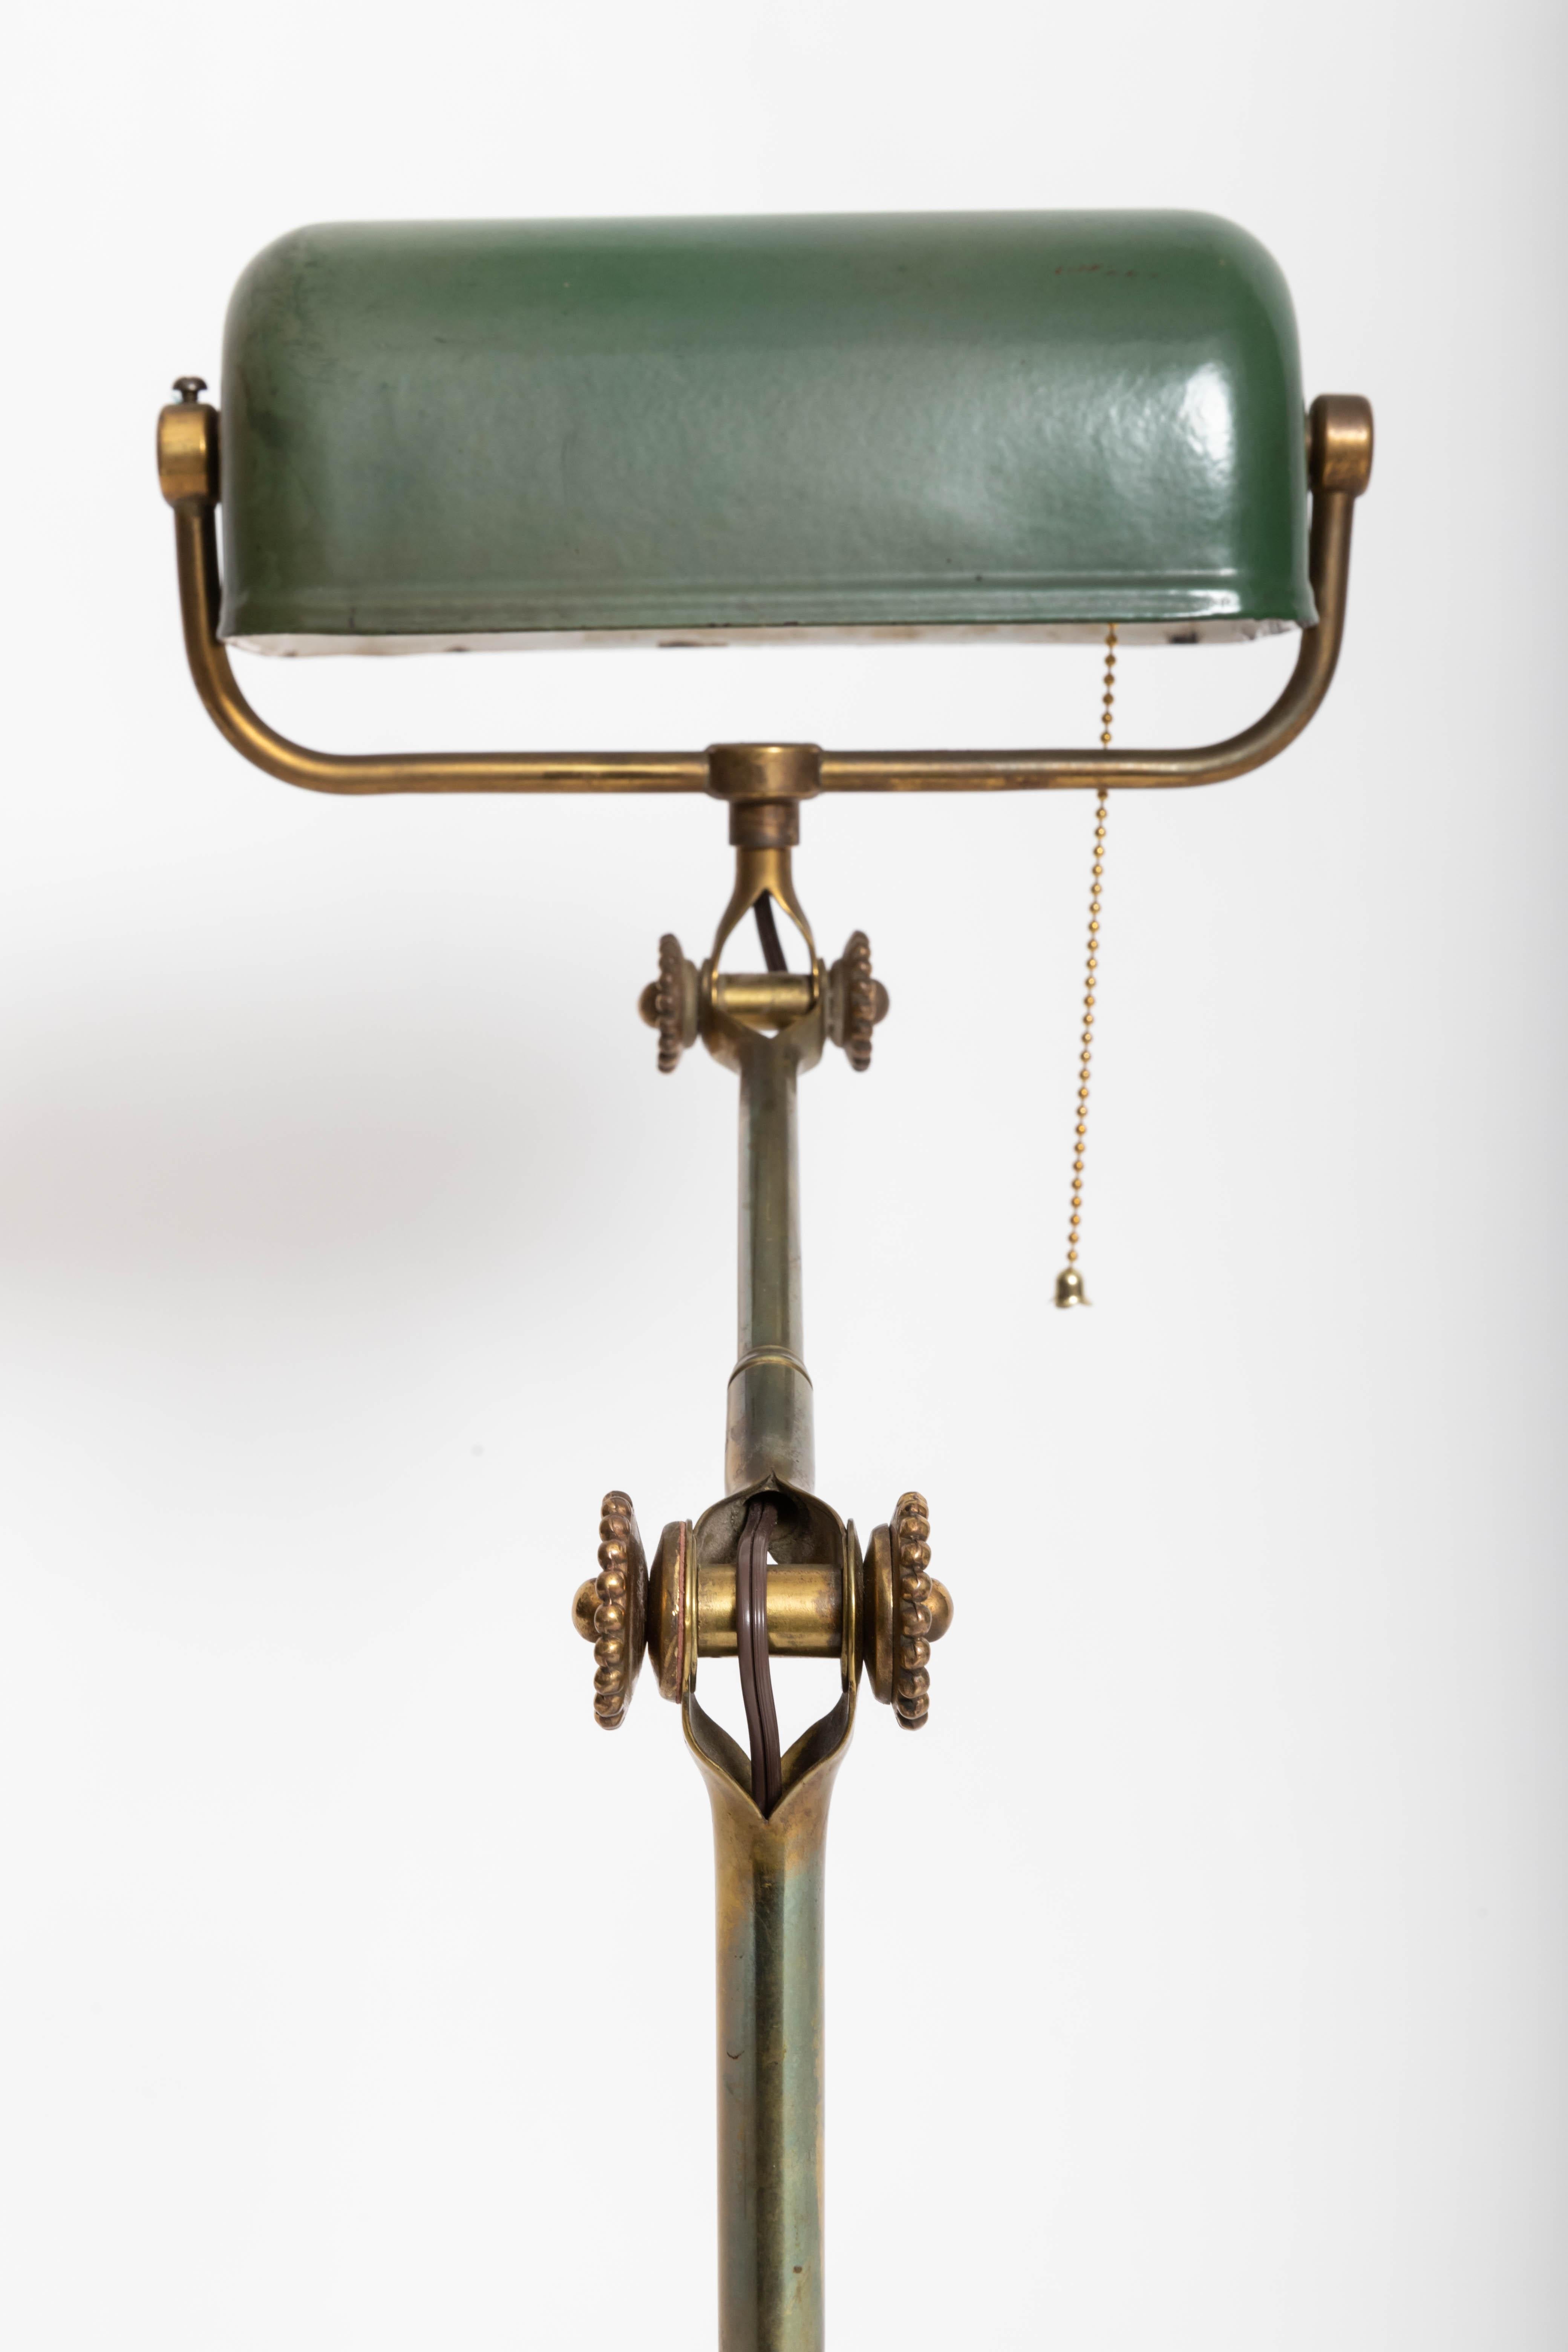 Early 20th Century Turn-of-the-Century Brass Desk Lamp